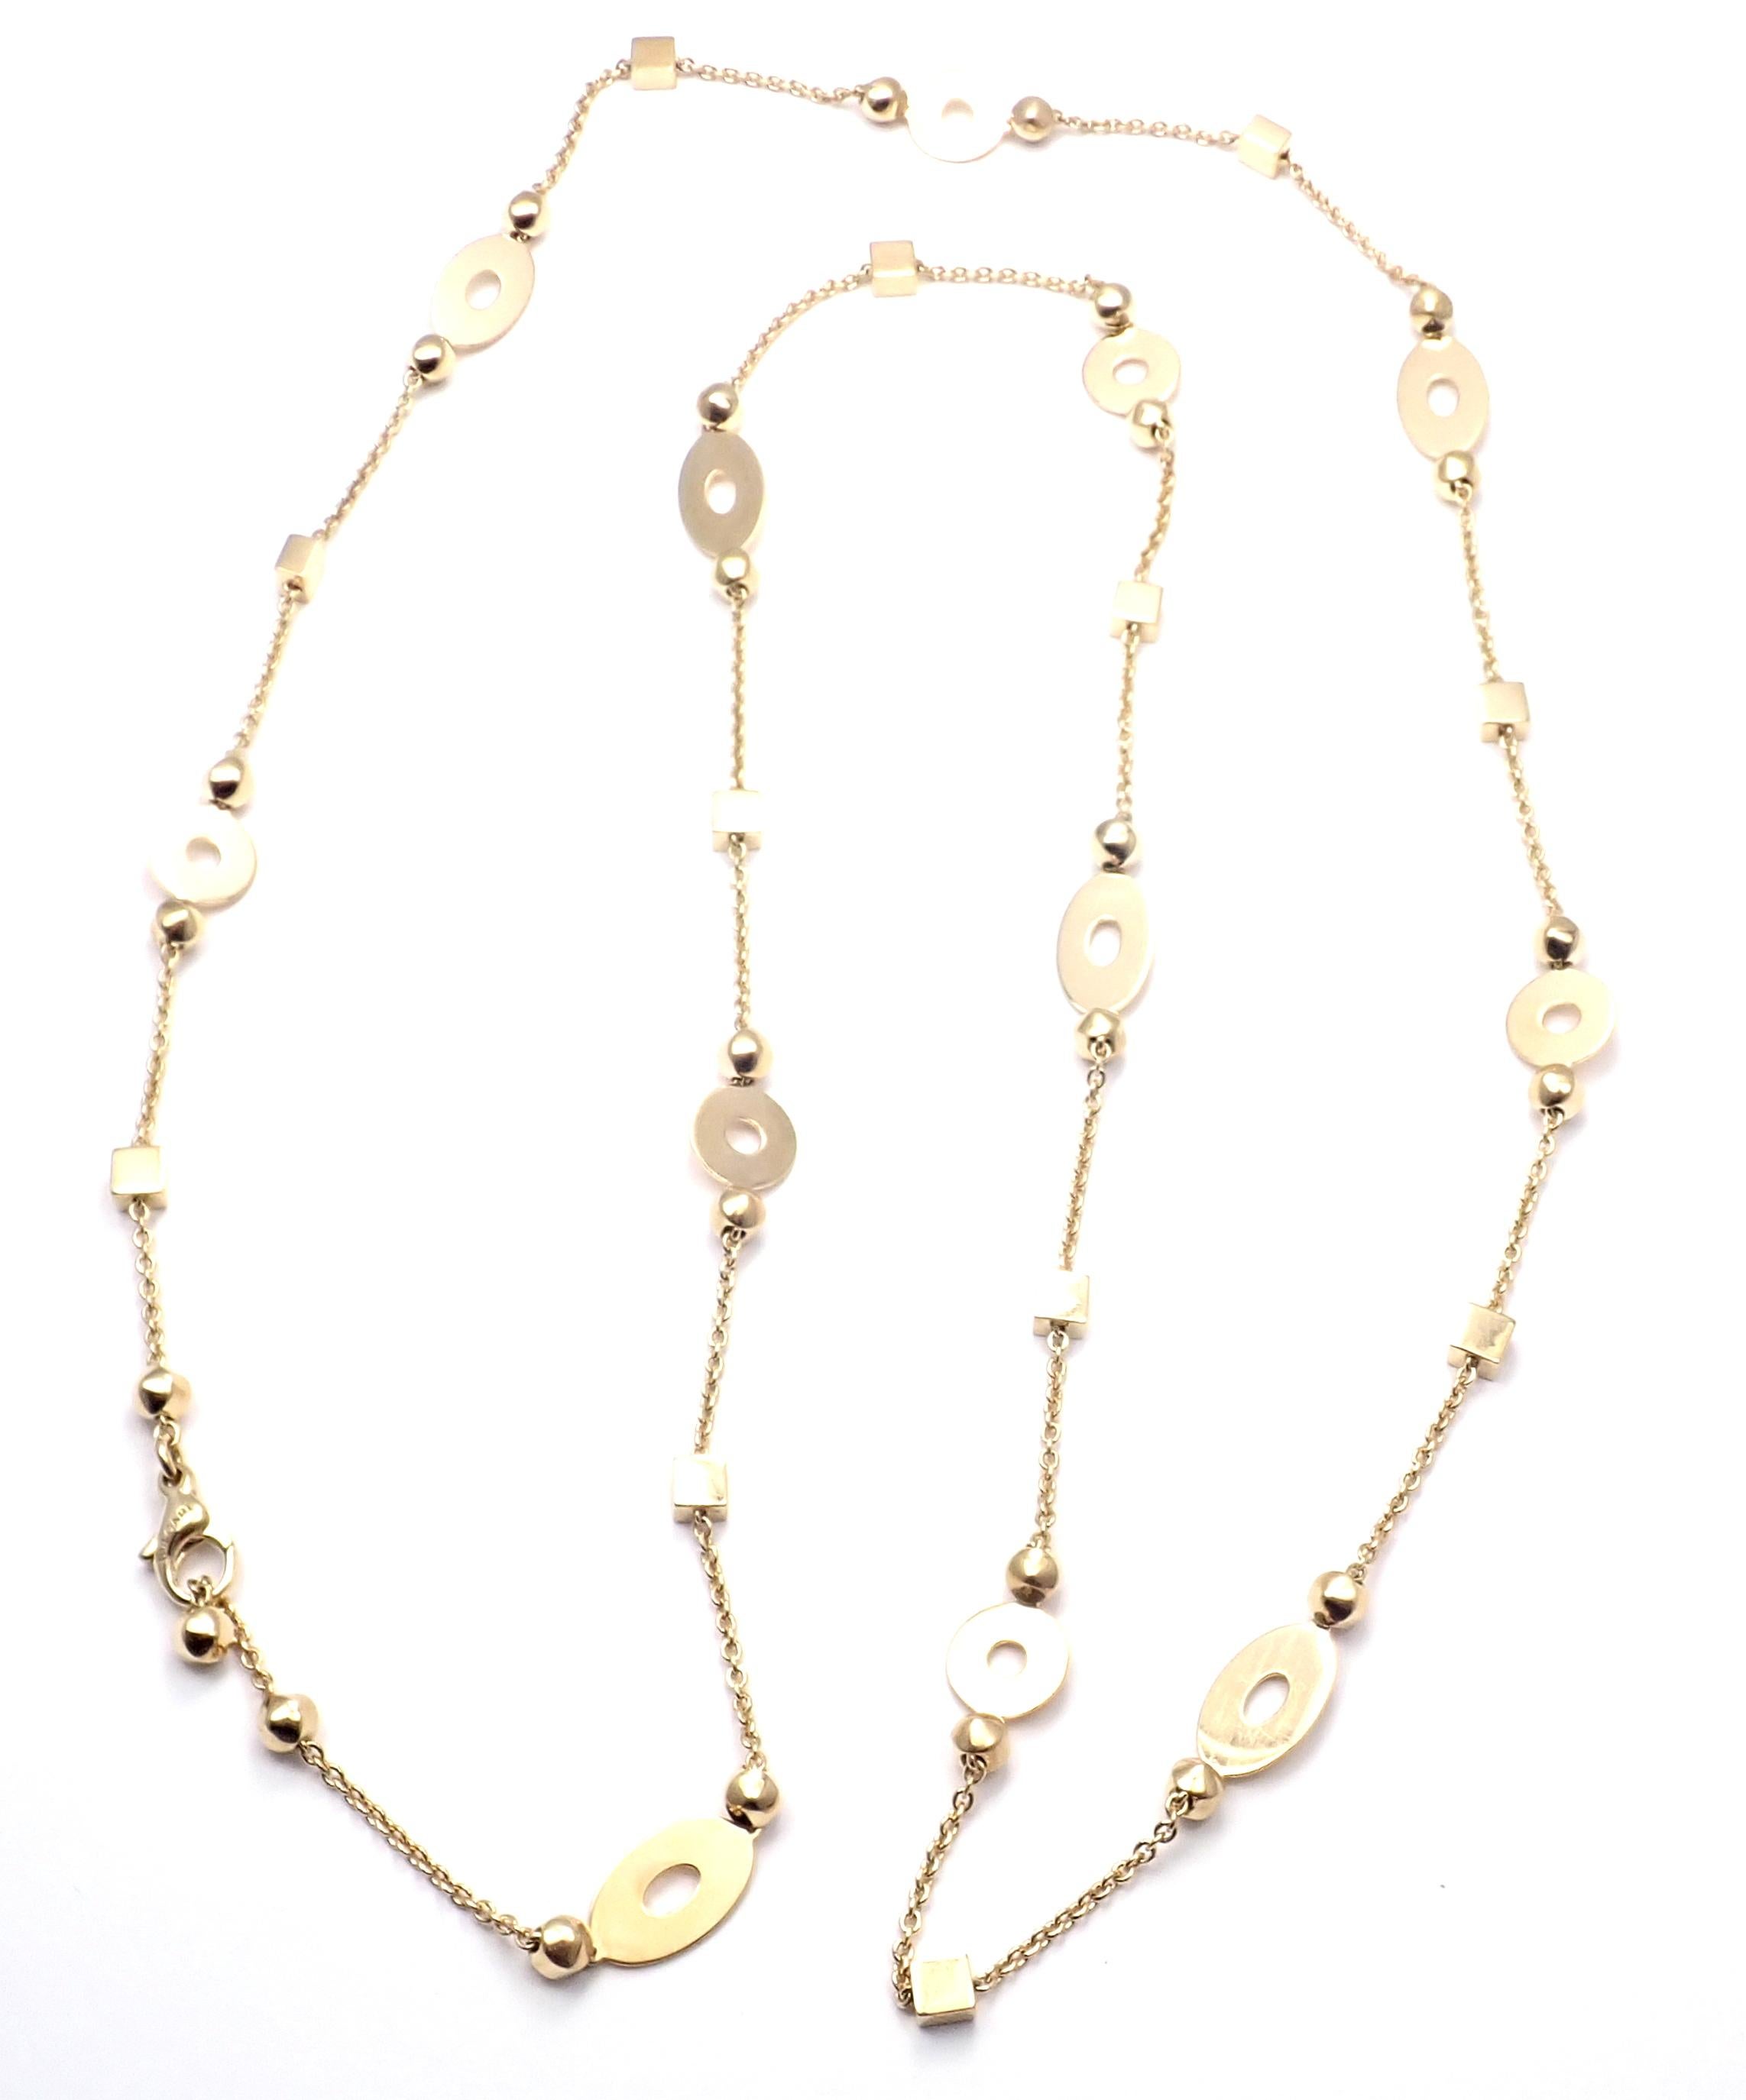 18k Yellow Gold Lucea Link Chain Necklace by Bulgari.
Details:
Length: 36